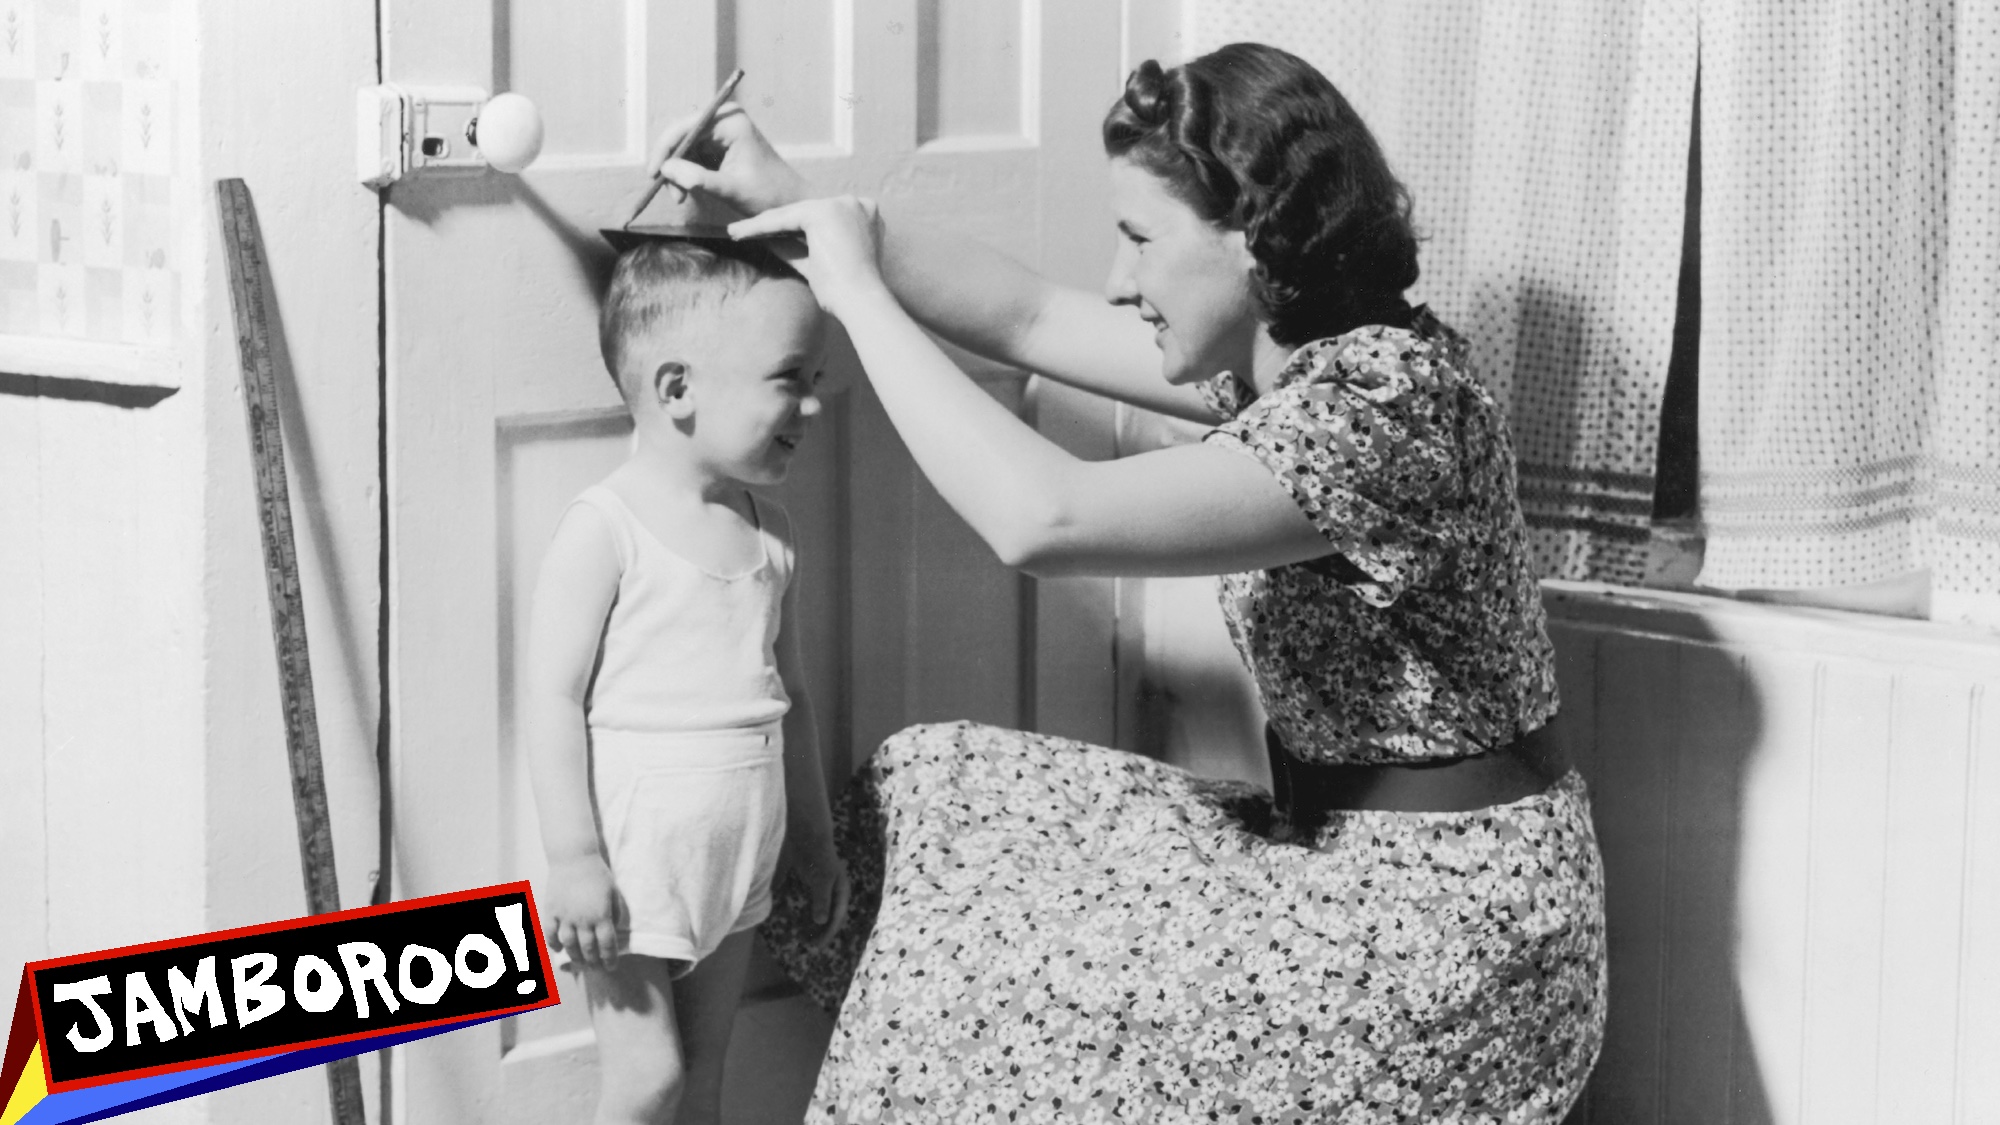 A mother marks her son's height on the door with a pencil, circa 1950. (Photo by FPG/Hulton Archive/Getty Images)